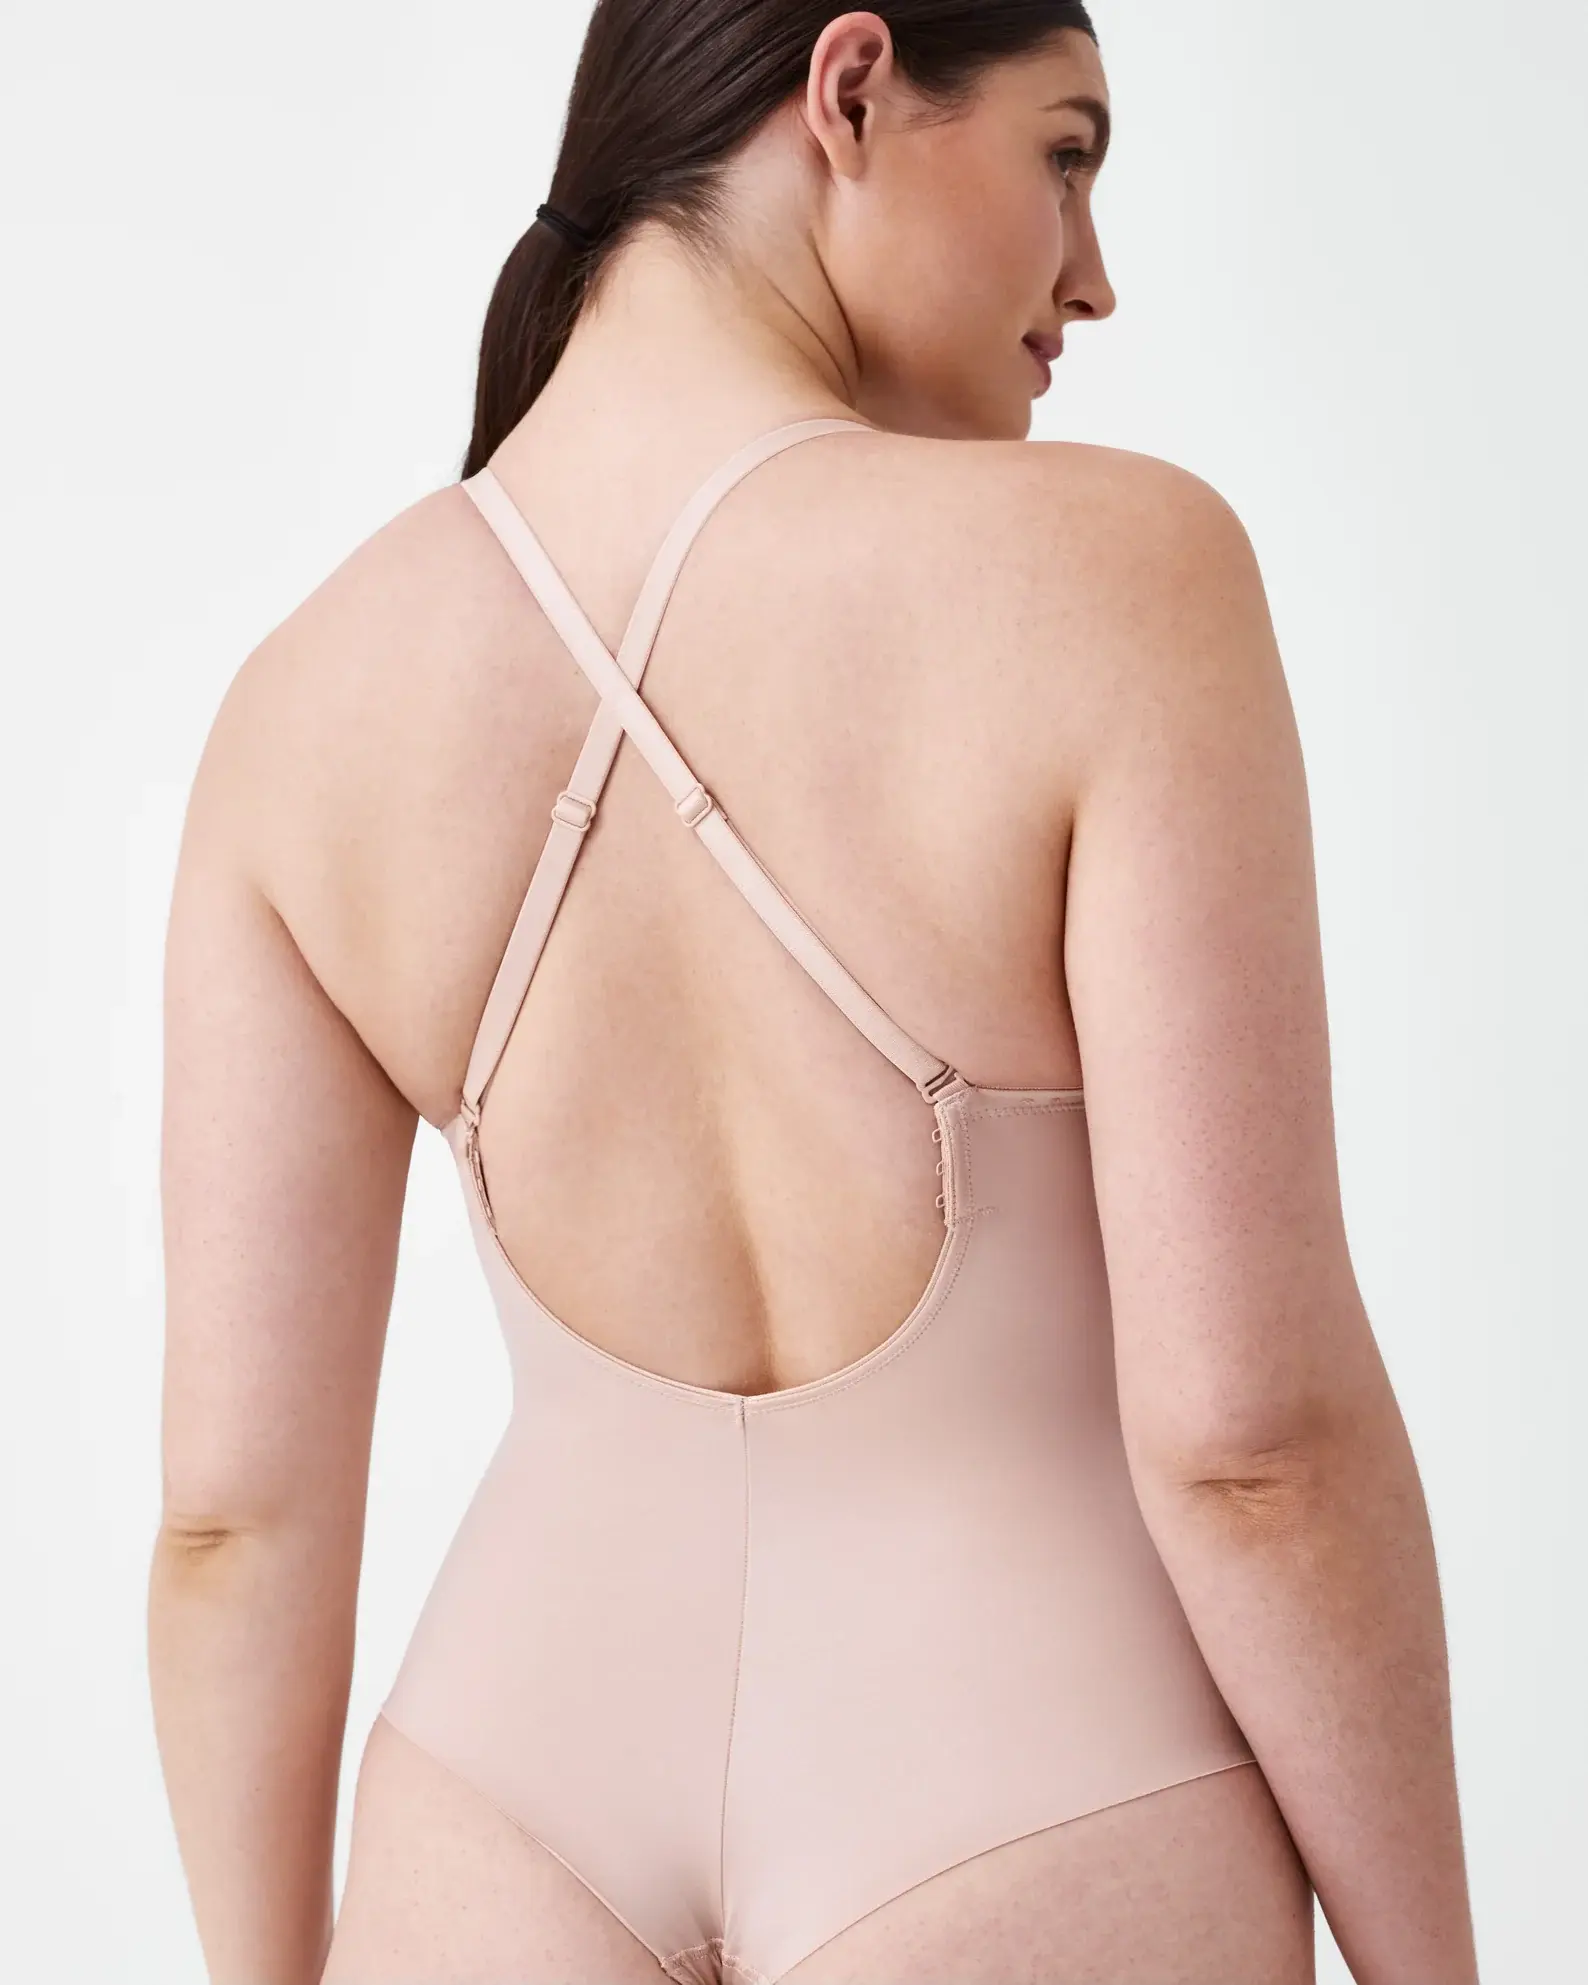 Spanx Suit Your Fancy Plunge Stretch-jersey Body In Champagne